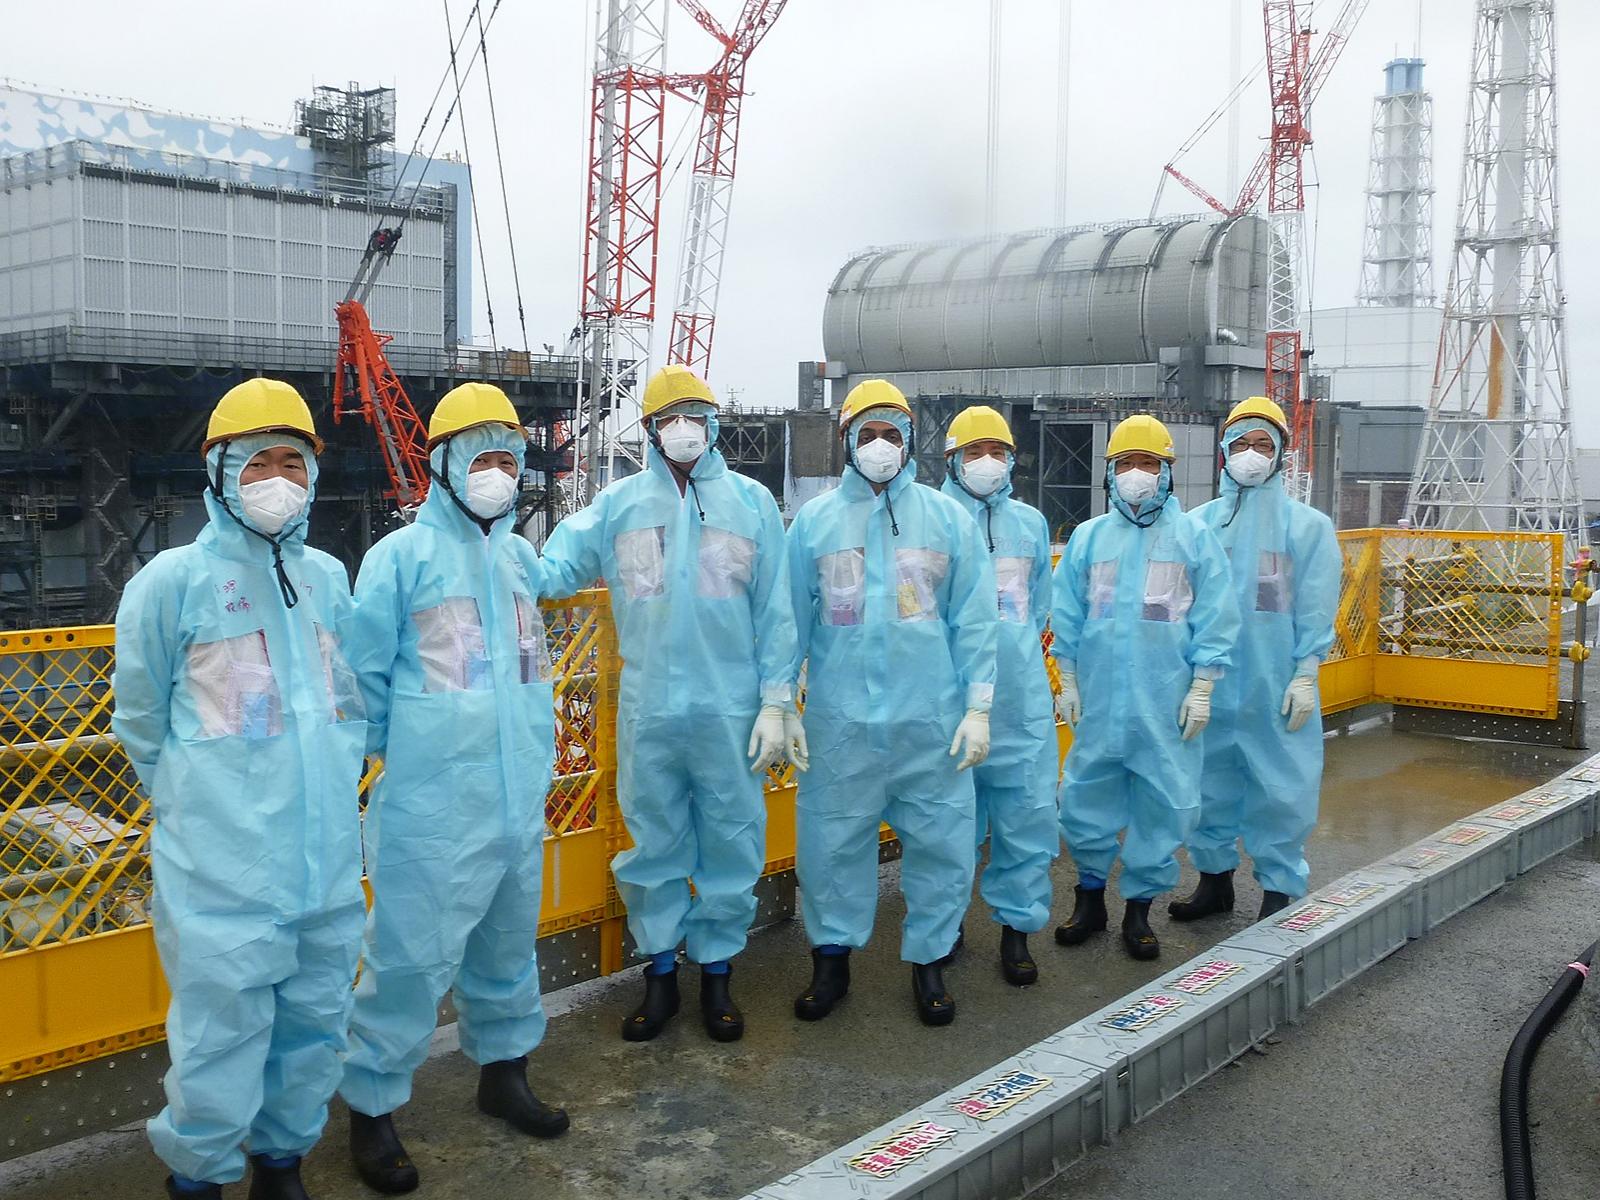 Group of visitors in front of Daiichi Nuclear Reactor in Fukushima Japan